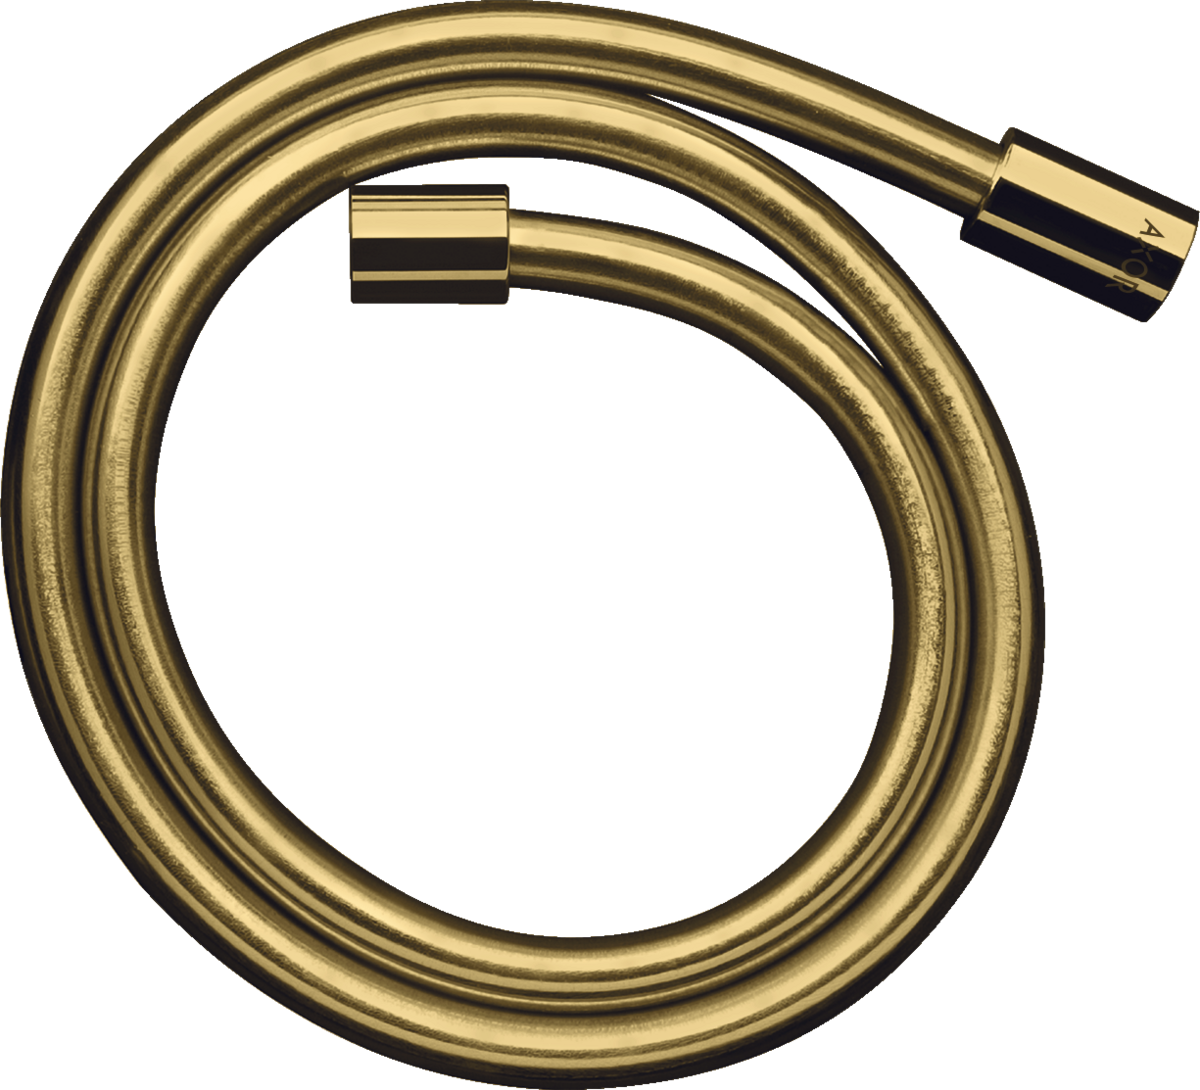 Picture of HANSGROHE AXOR Starck Metal effect shower hose 1.25 m with cylindrical nuts #28282990 - Polished Gold Optic